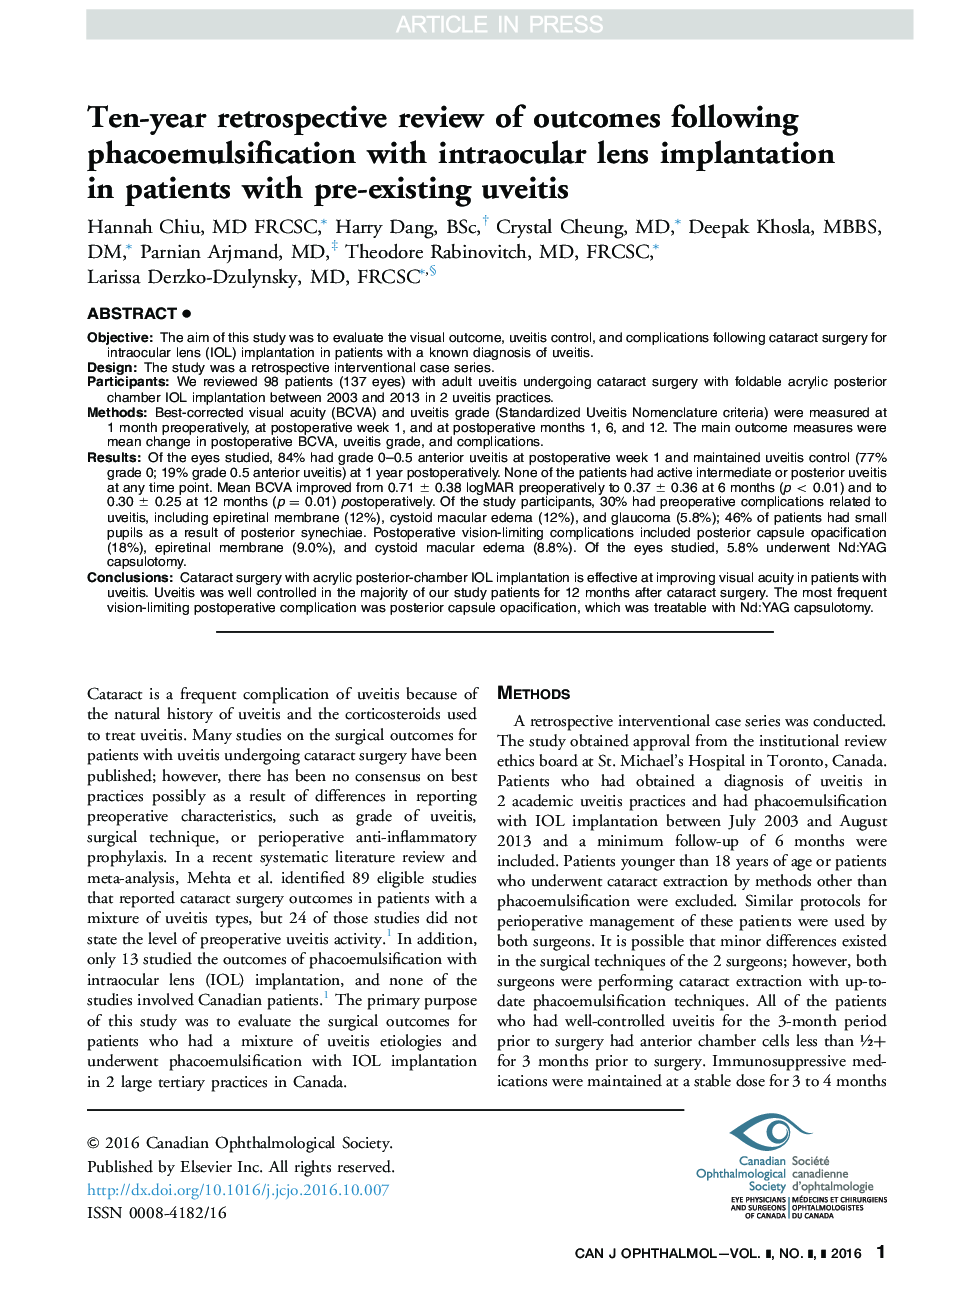 Ten-year retrospective review of outcomes following phacoemulsification with intraocular lens implantation in patients with pre-existing uveitis